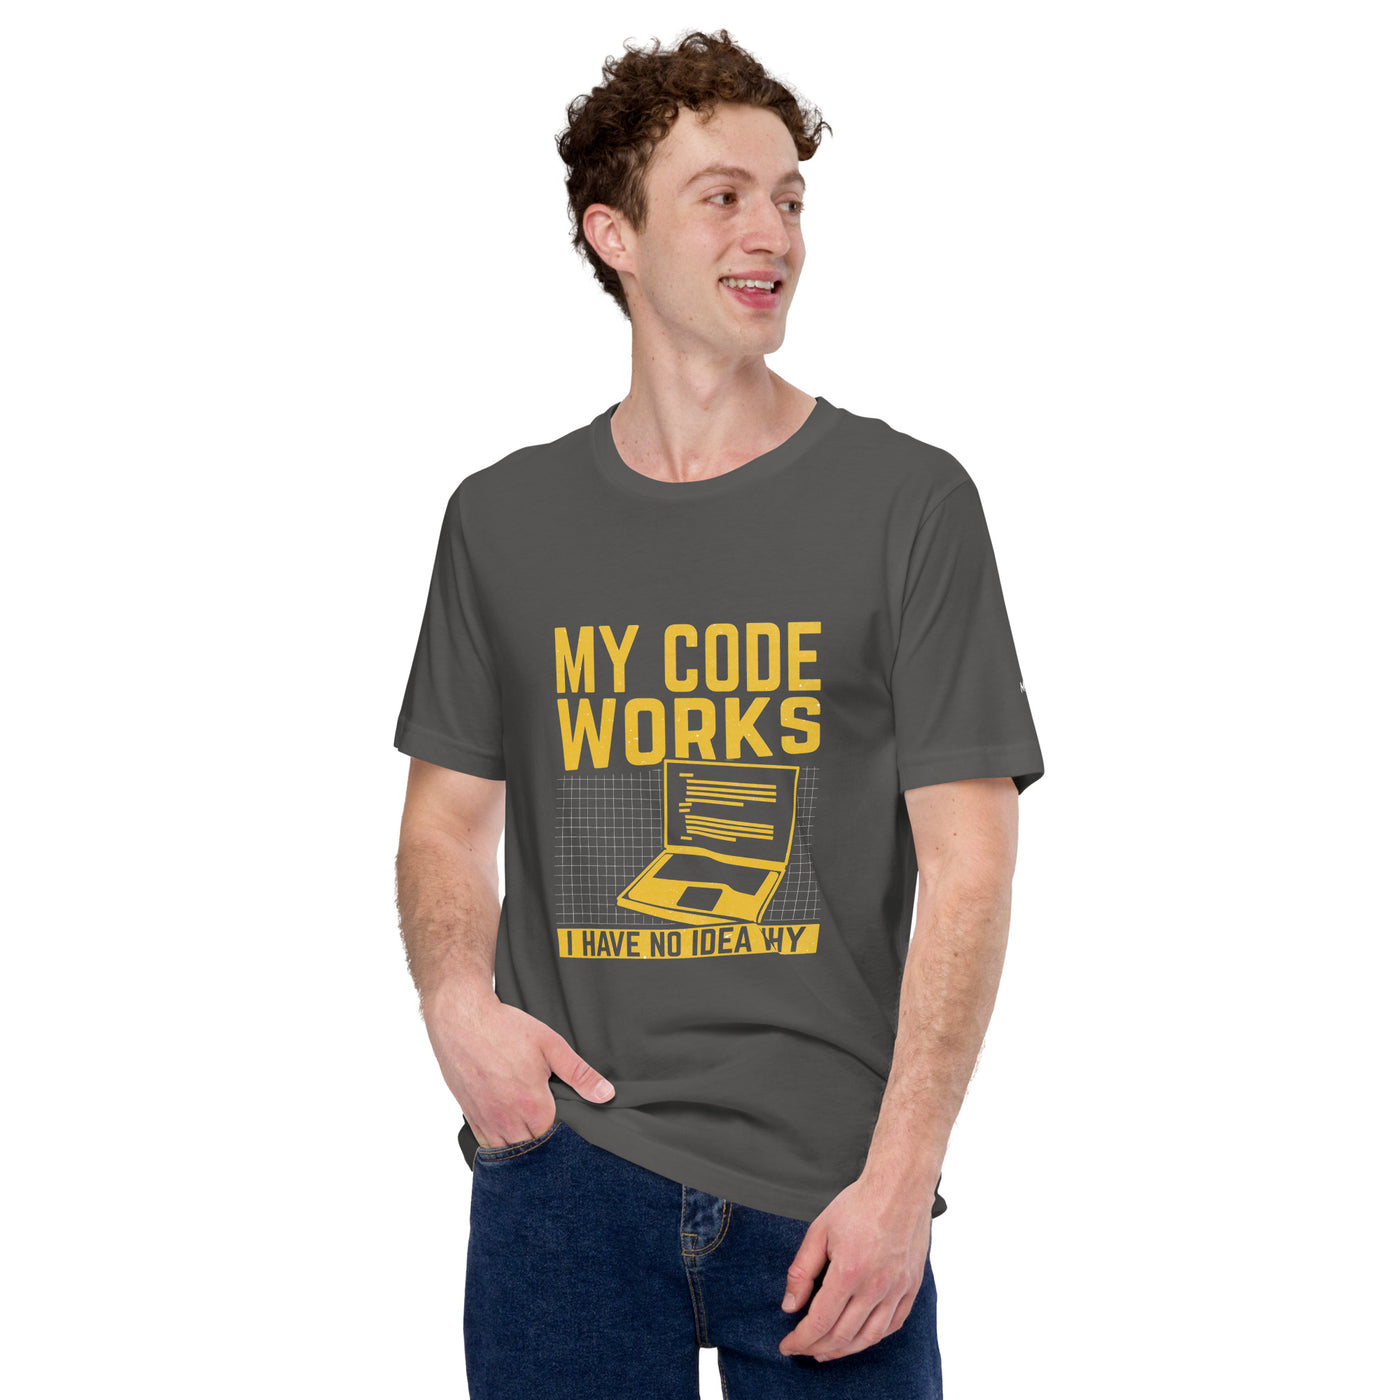 My Code works, I have no Idea why - Unisex t-shirt